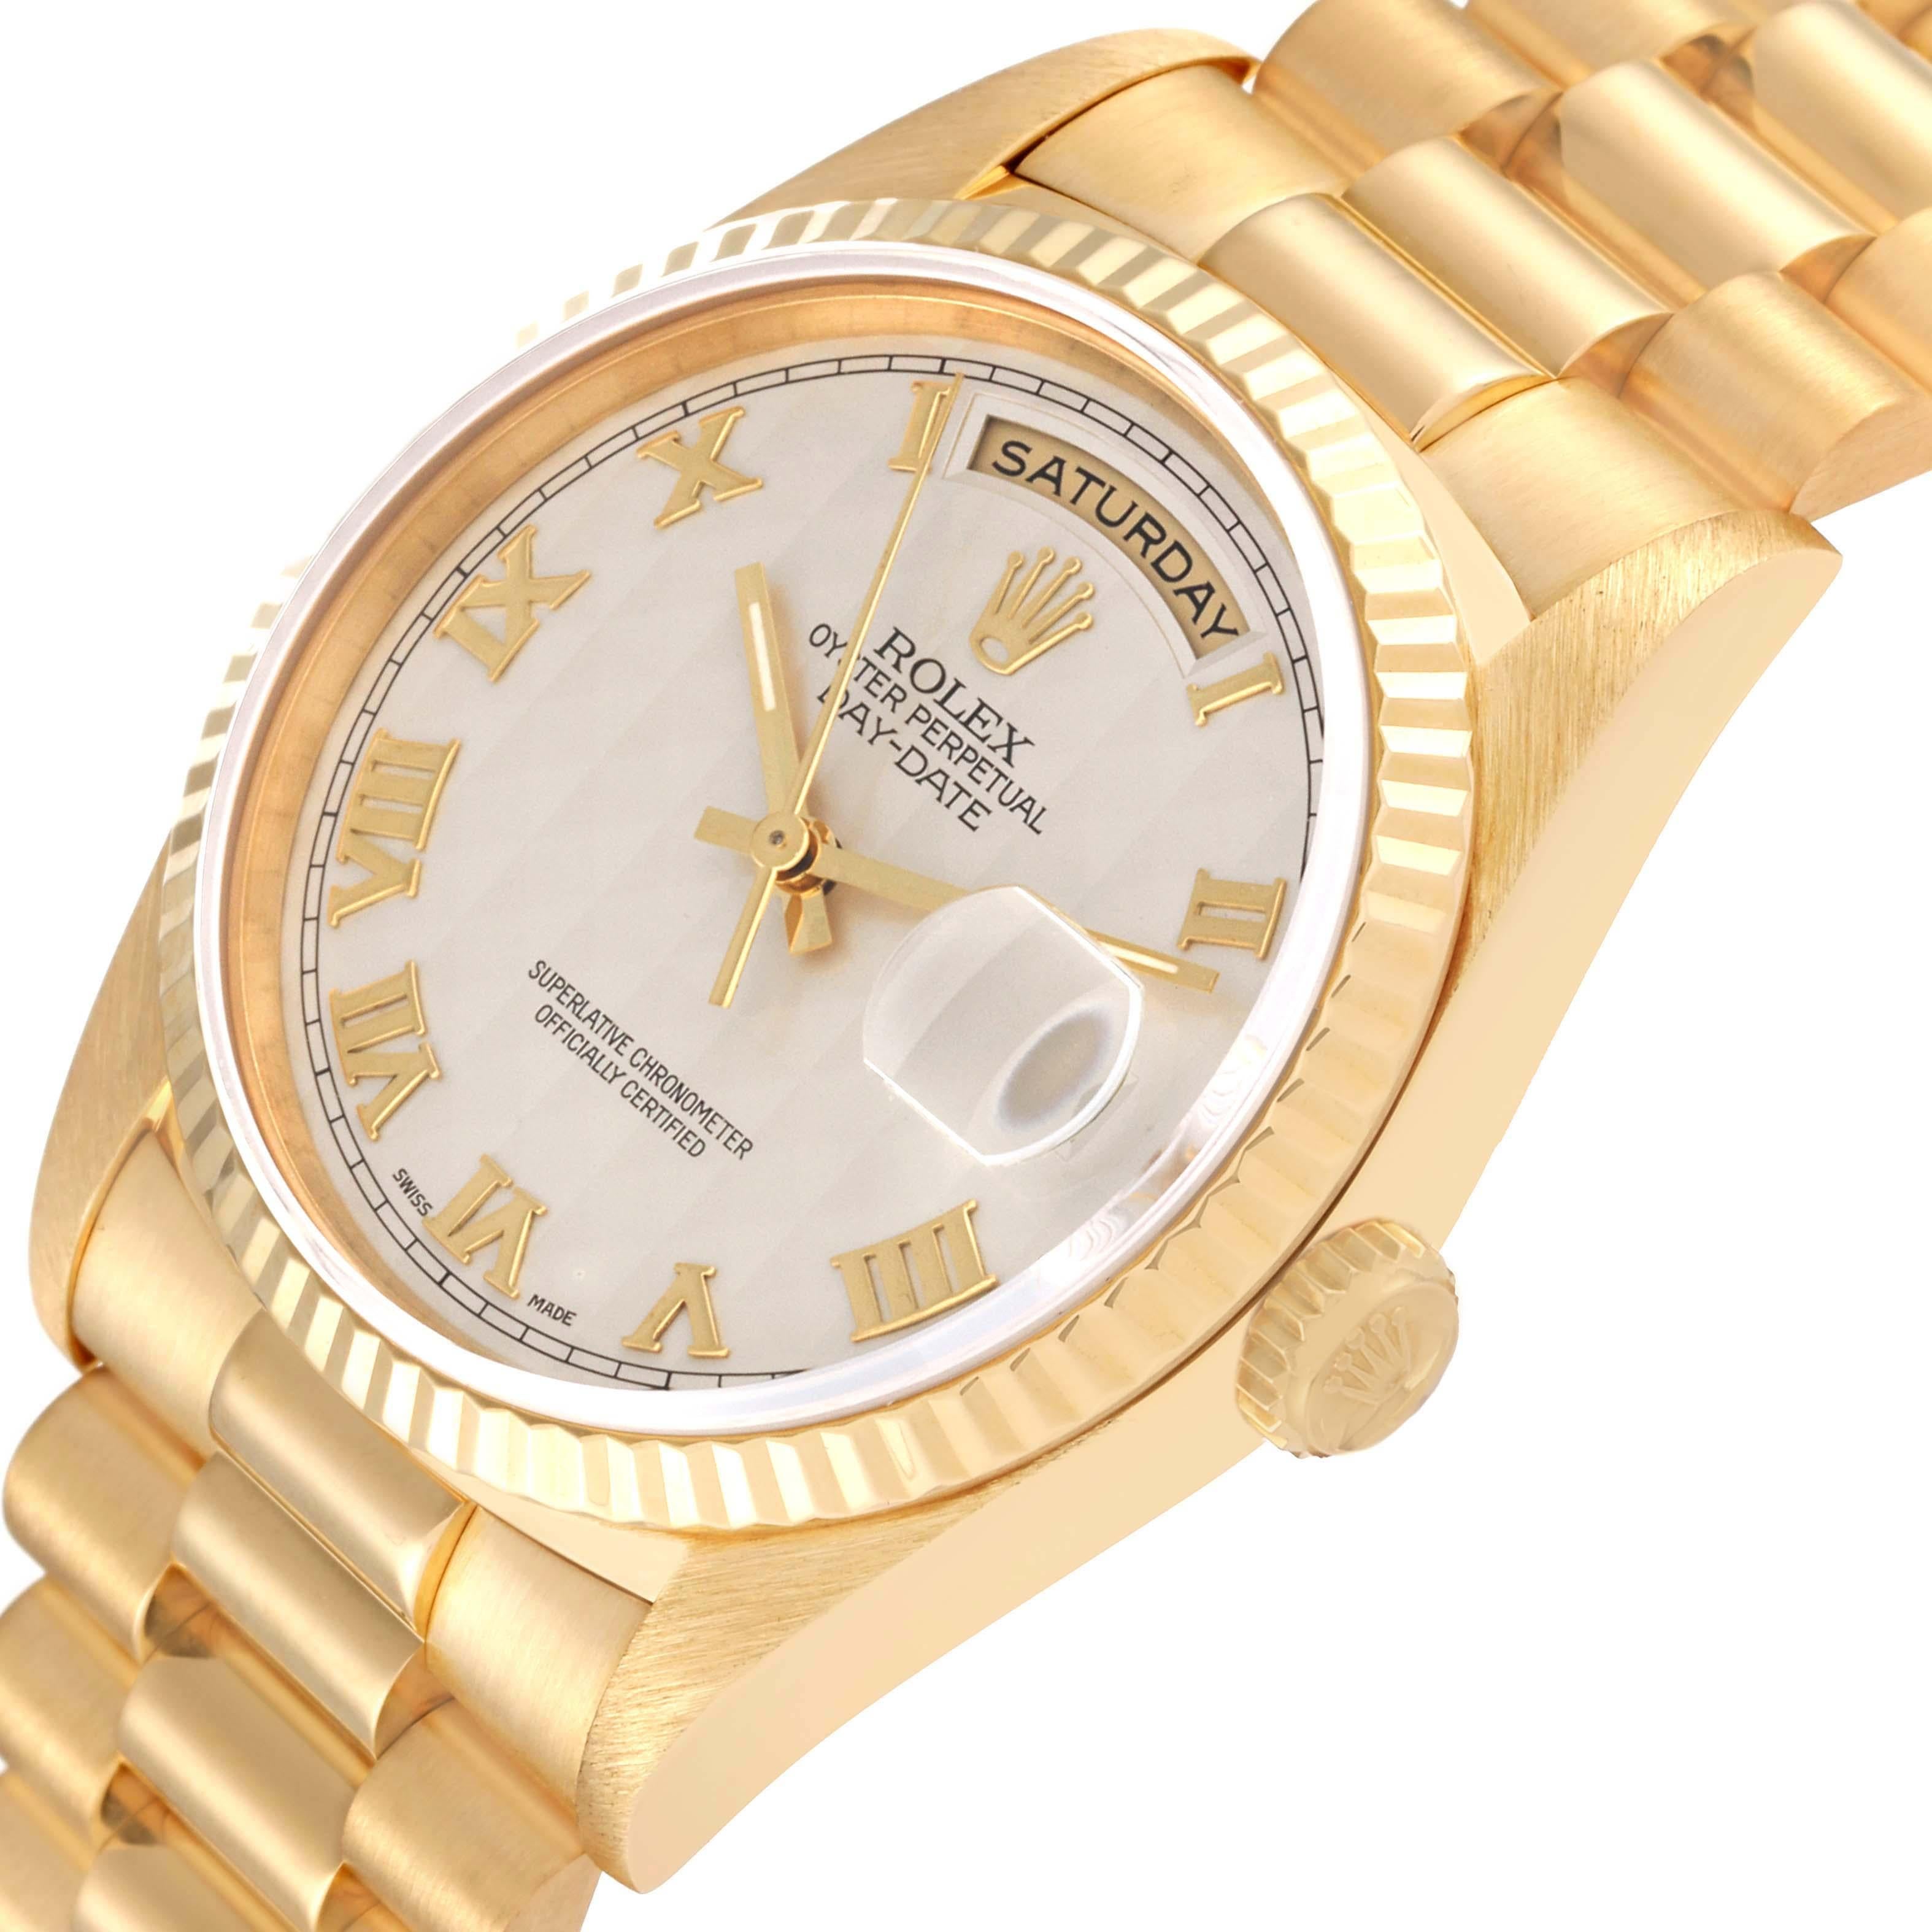 Rolex President Day-Date Pyramid Dial Yellow Gold Mens Watch 18238 Box Papers 1